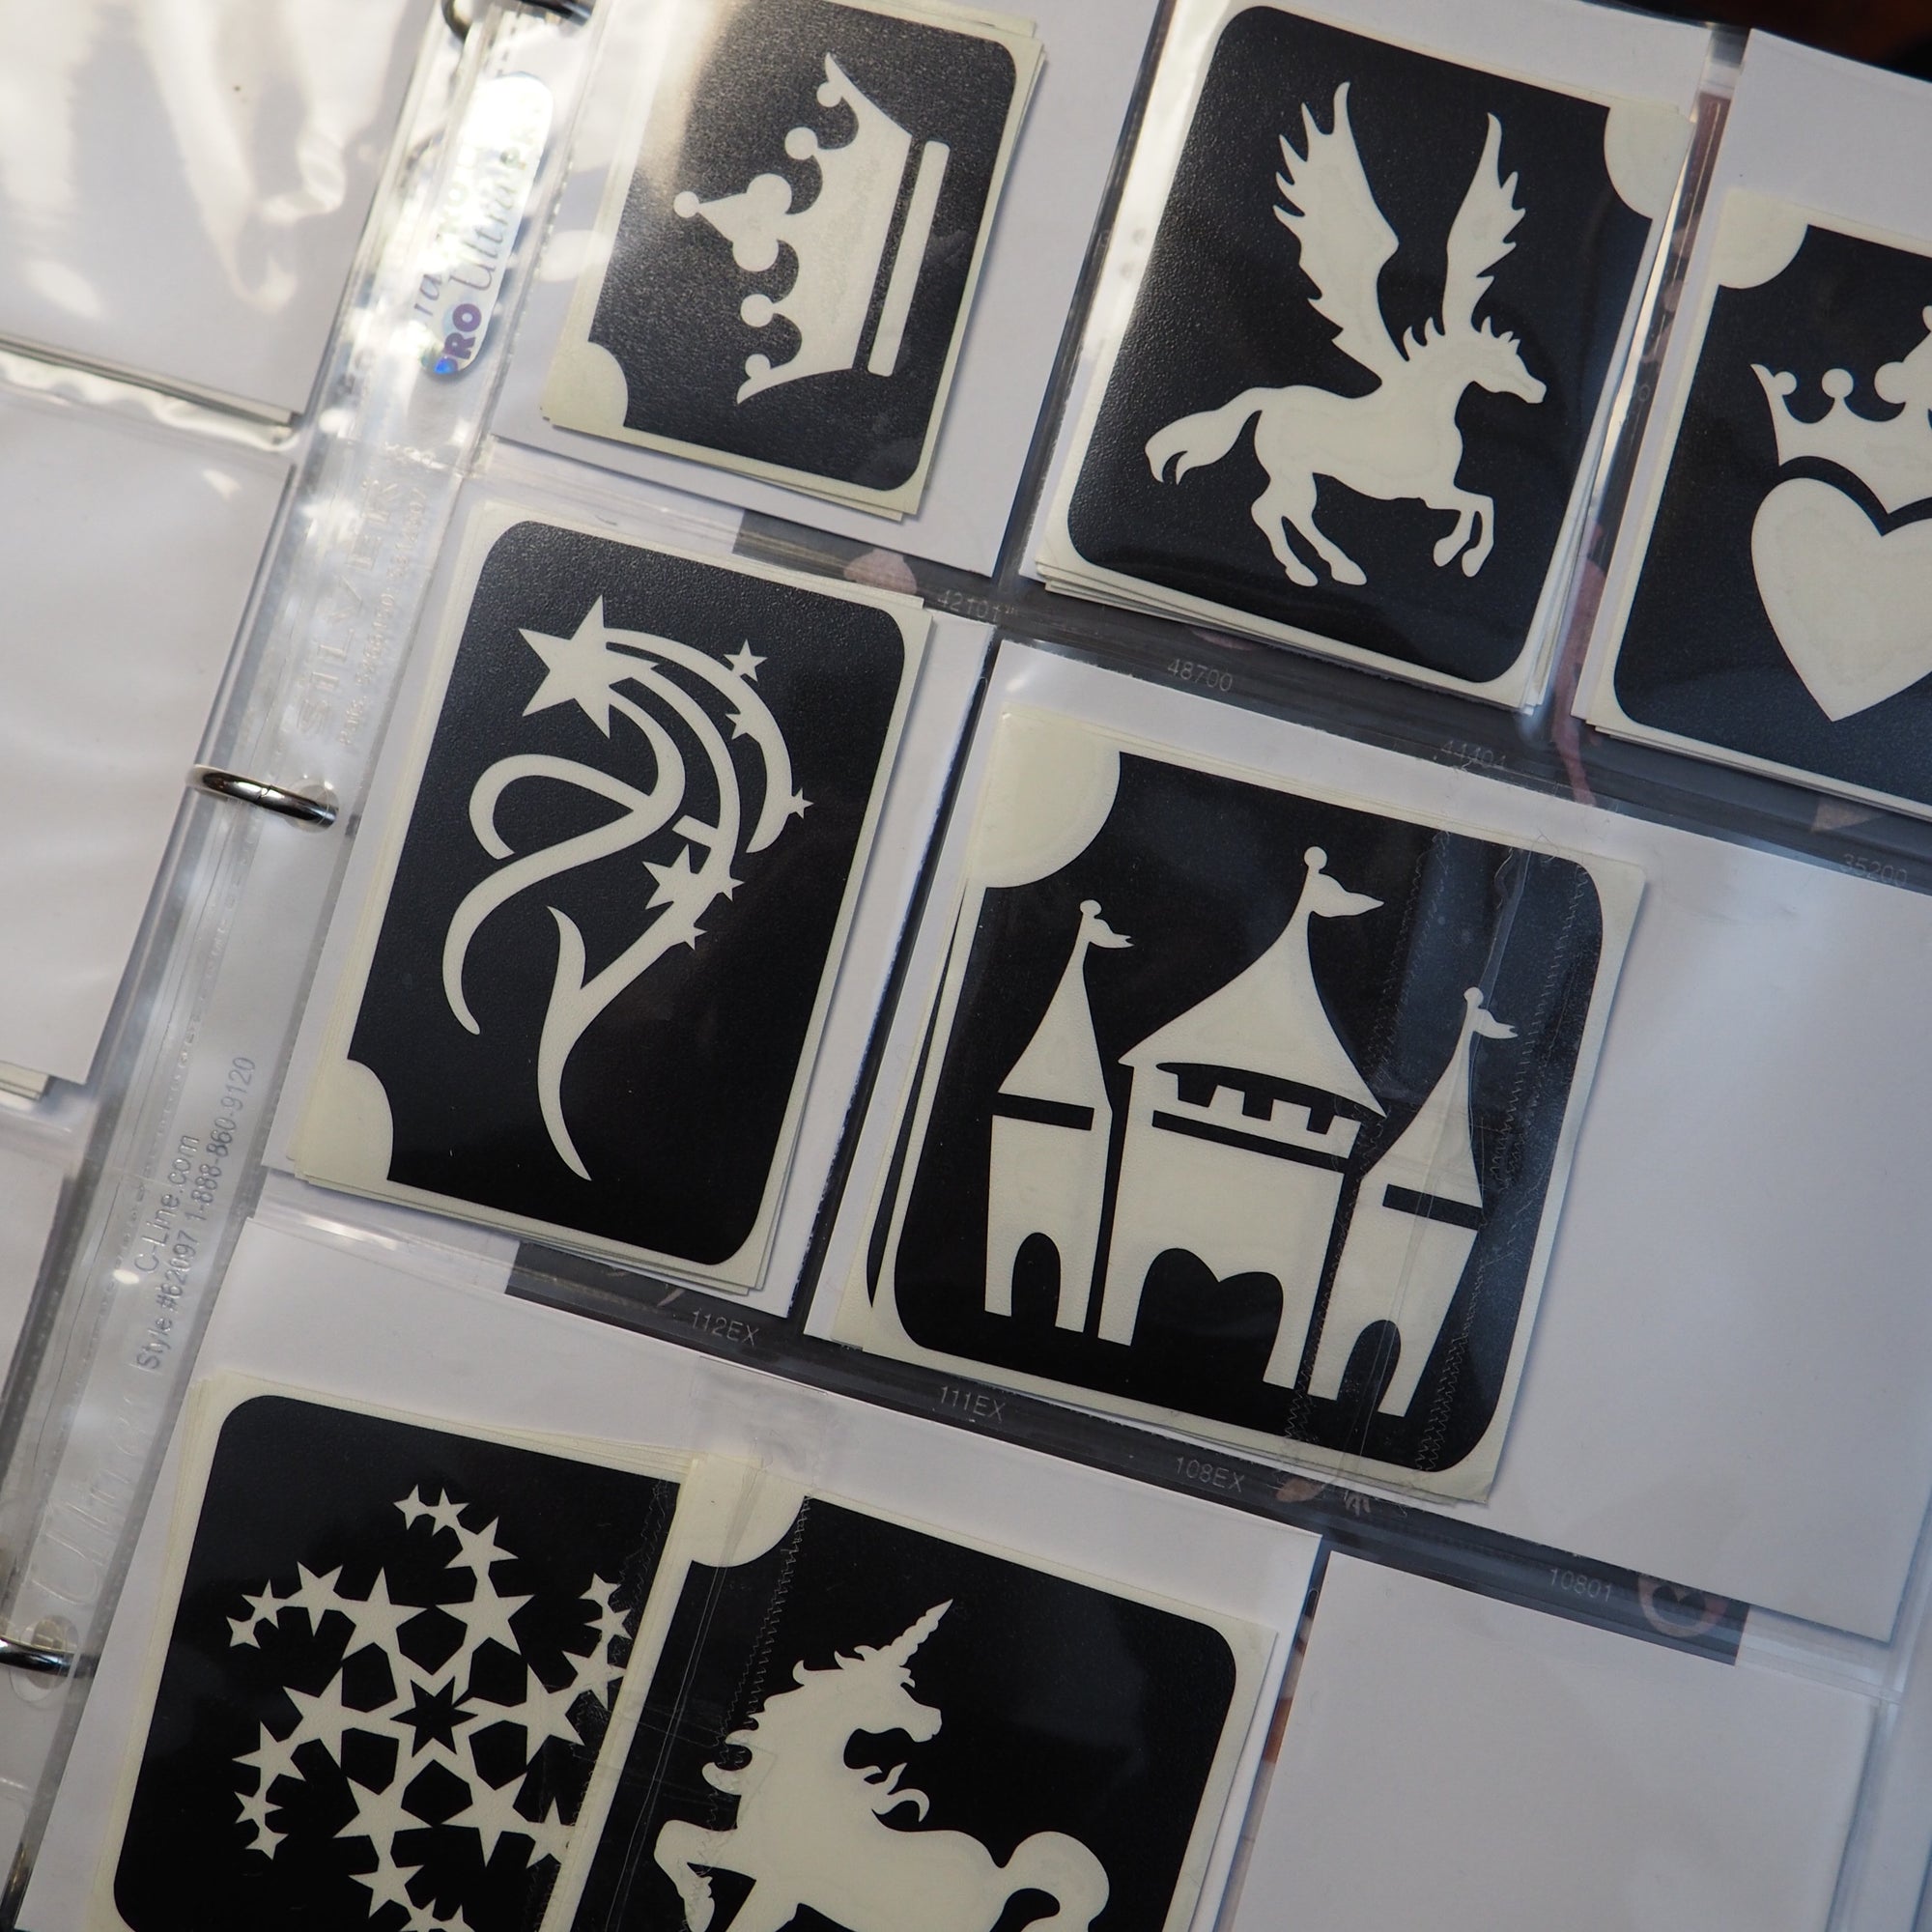 Video: How to Organize Your Glitter Tattoo Stencils